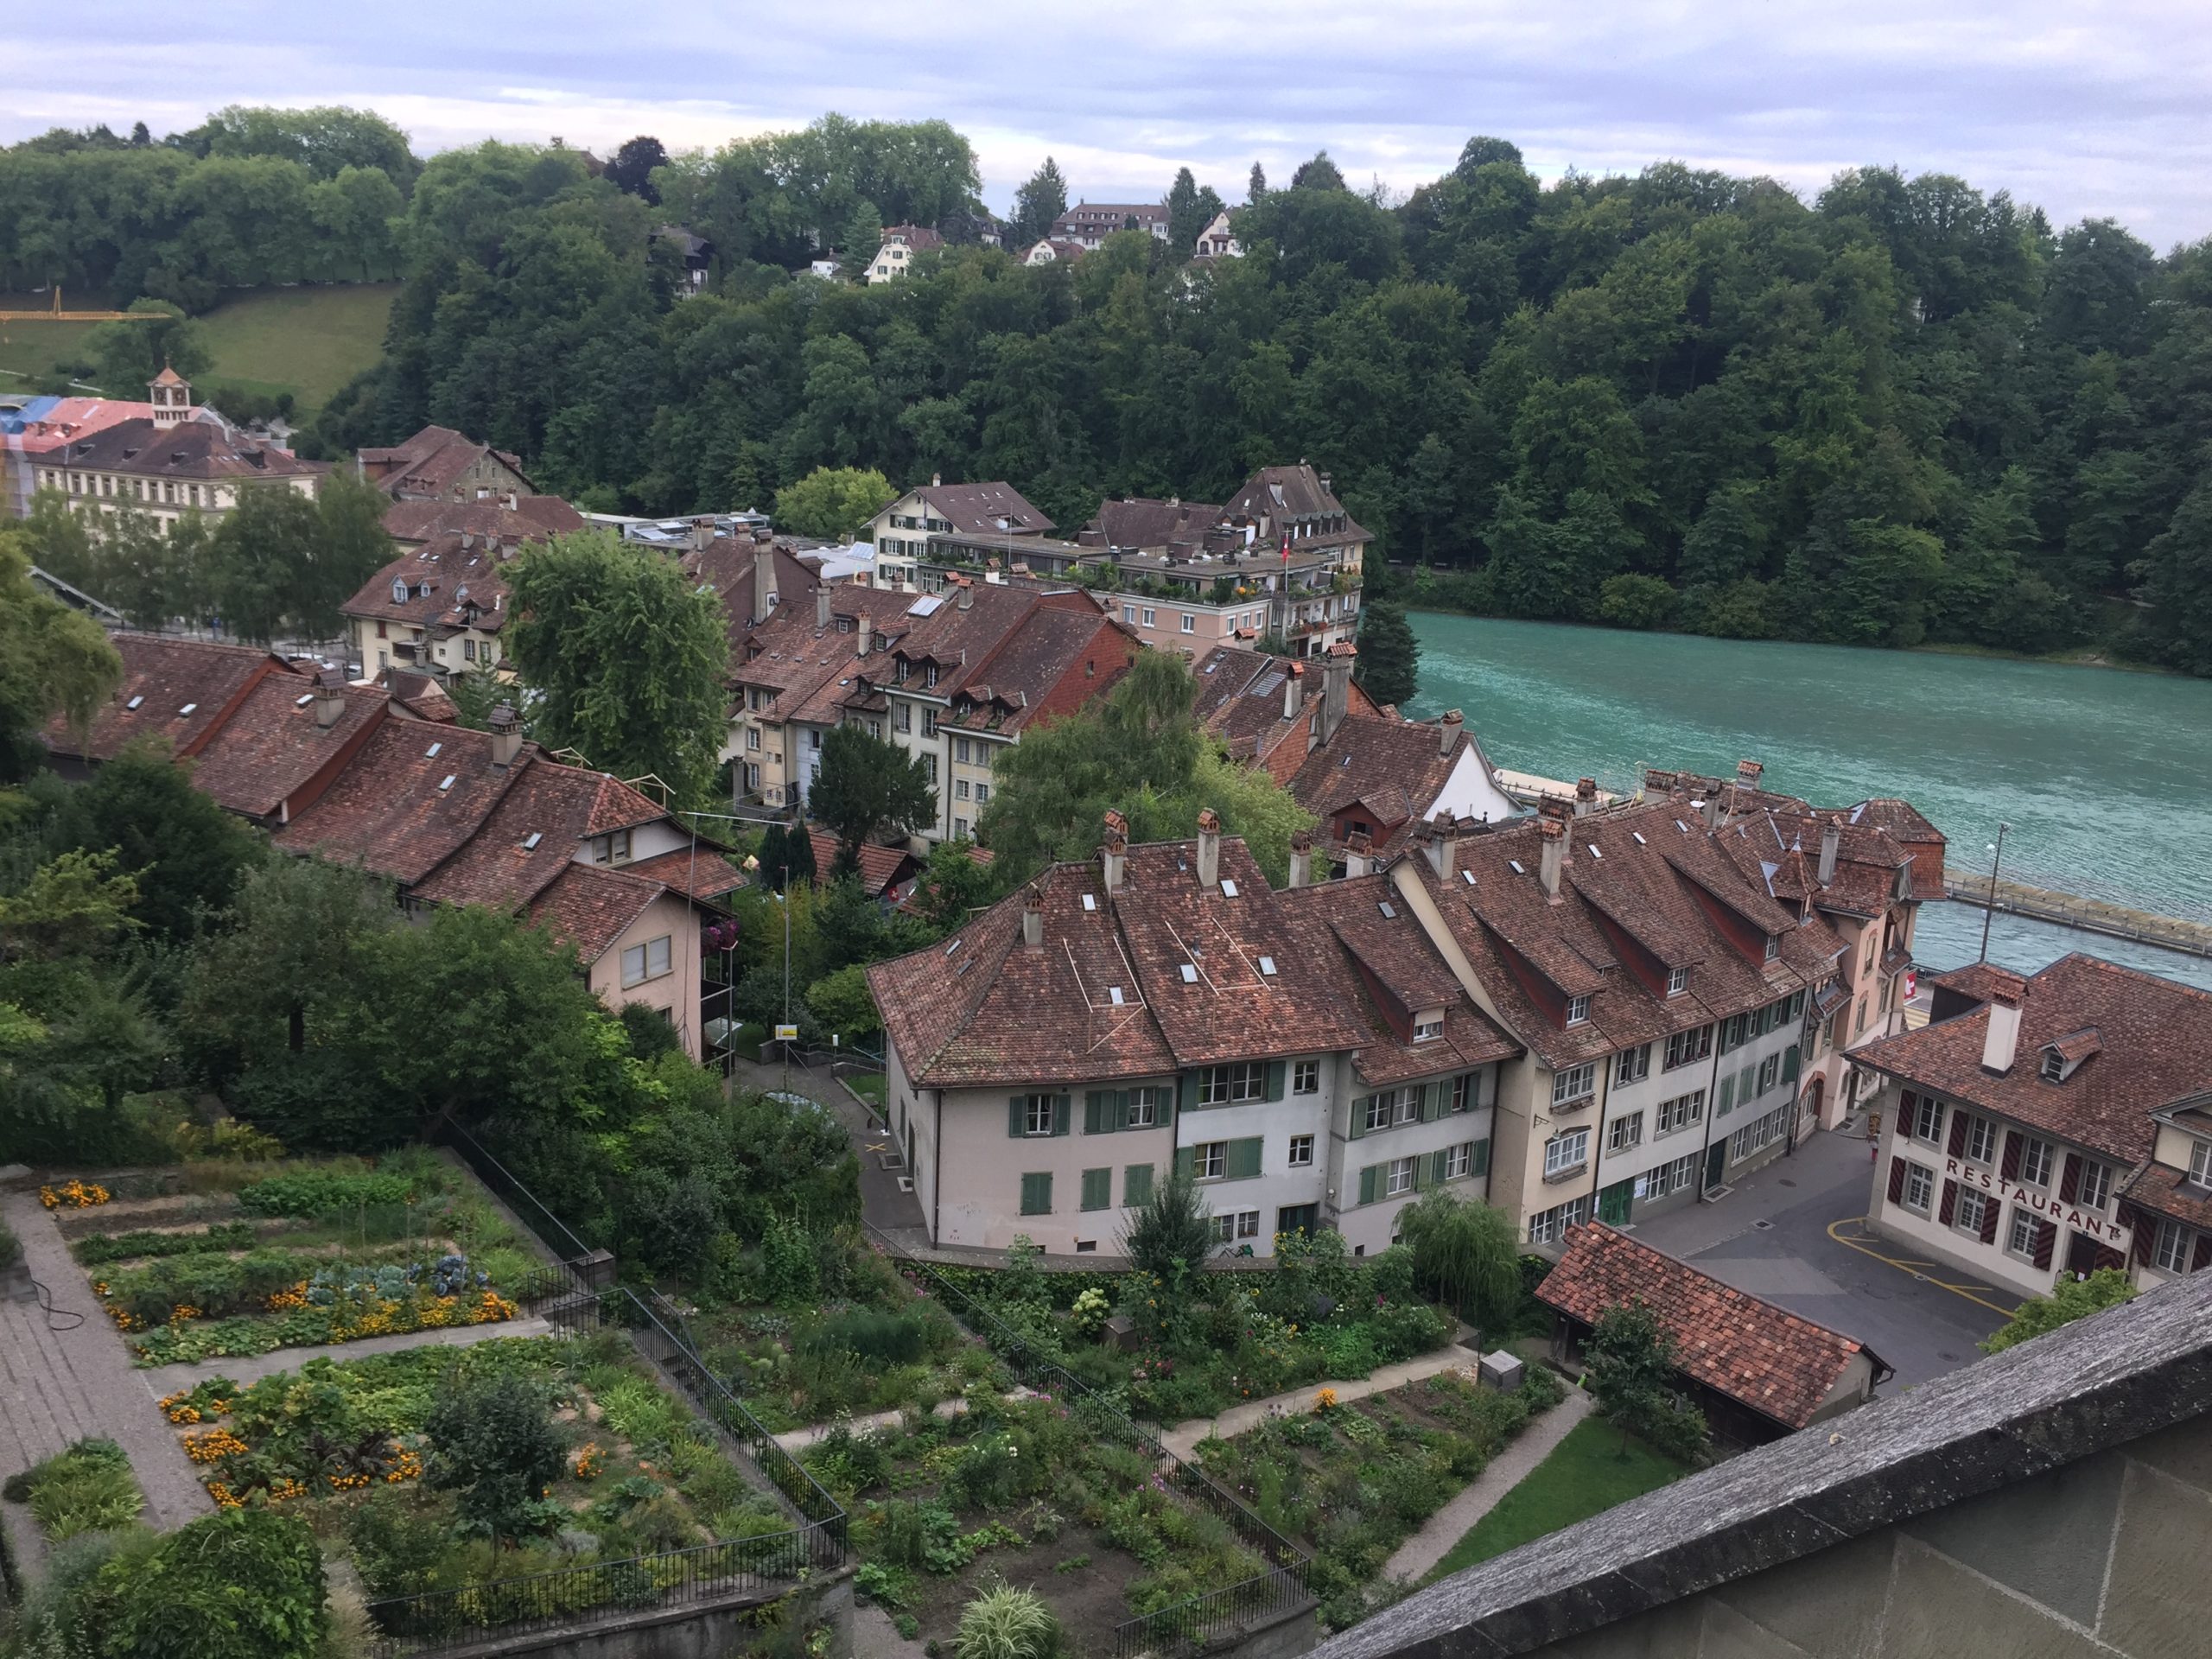 River Aare and the cute houses next to it seen from Münsterplattform